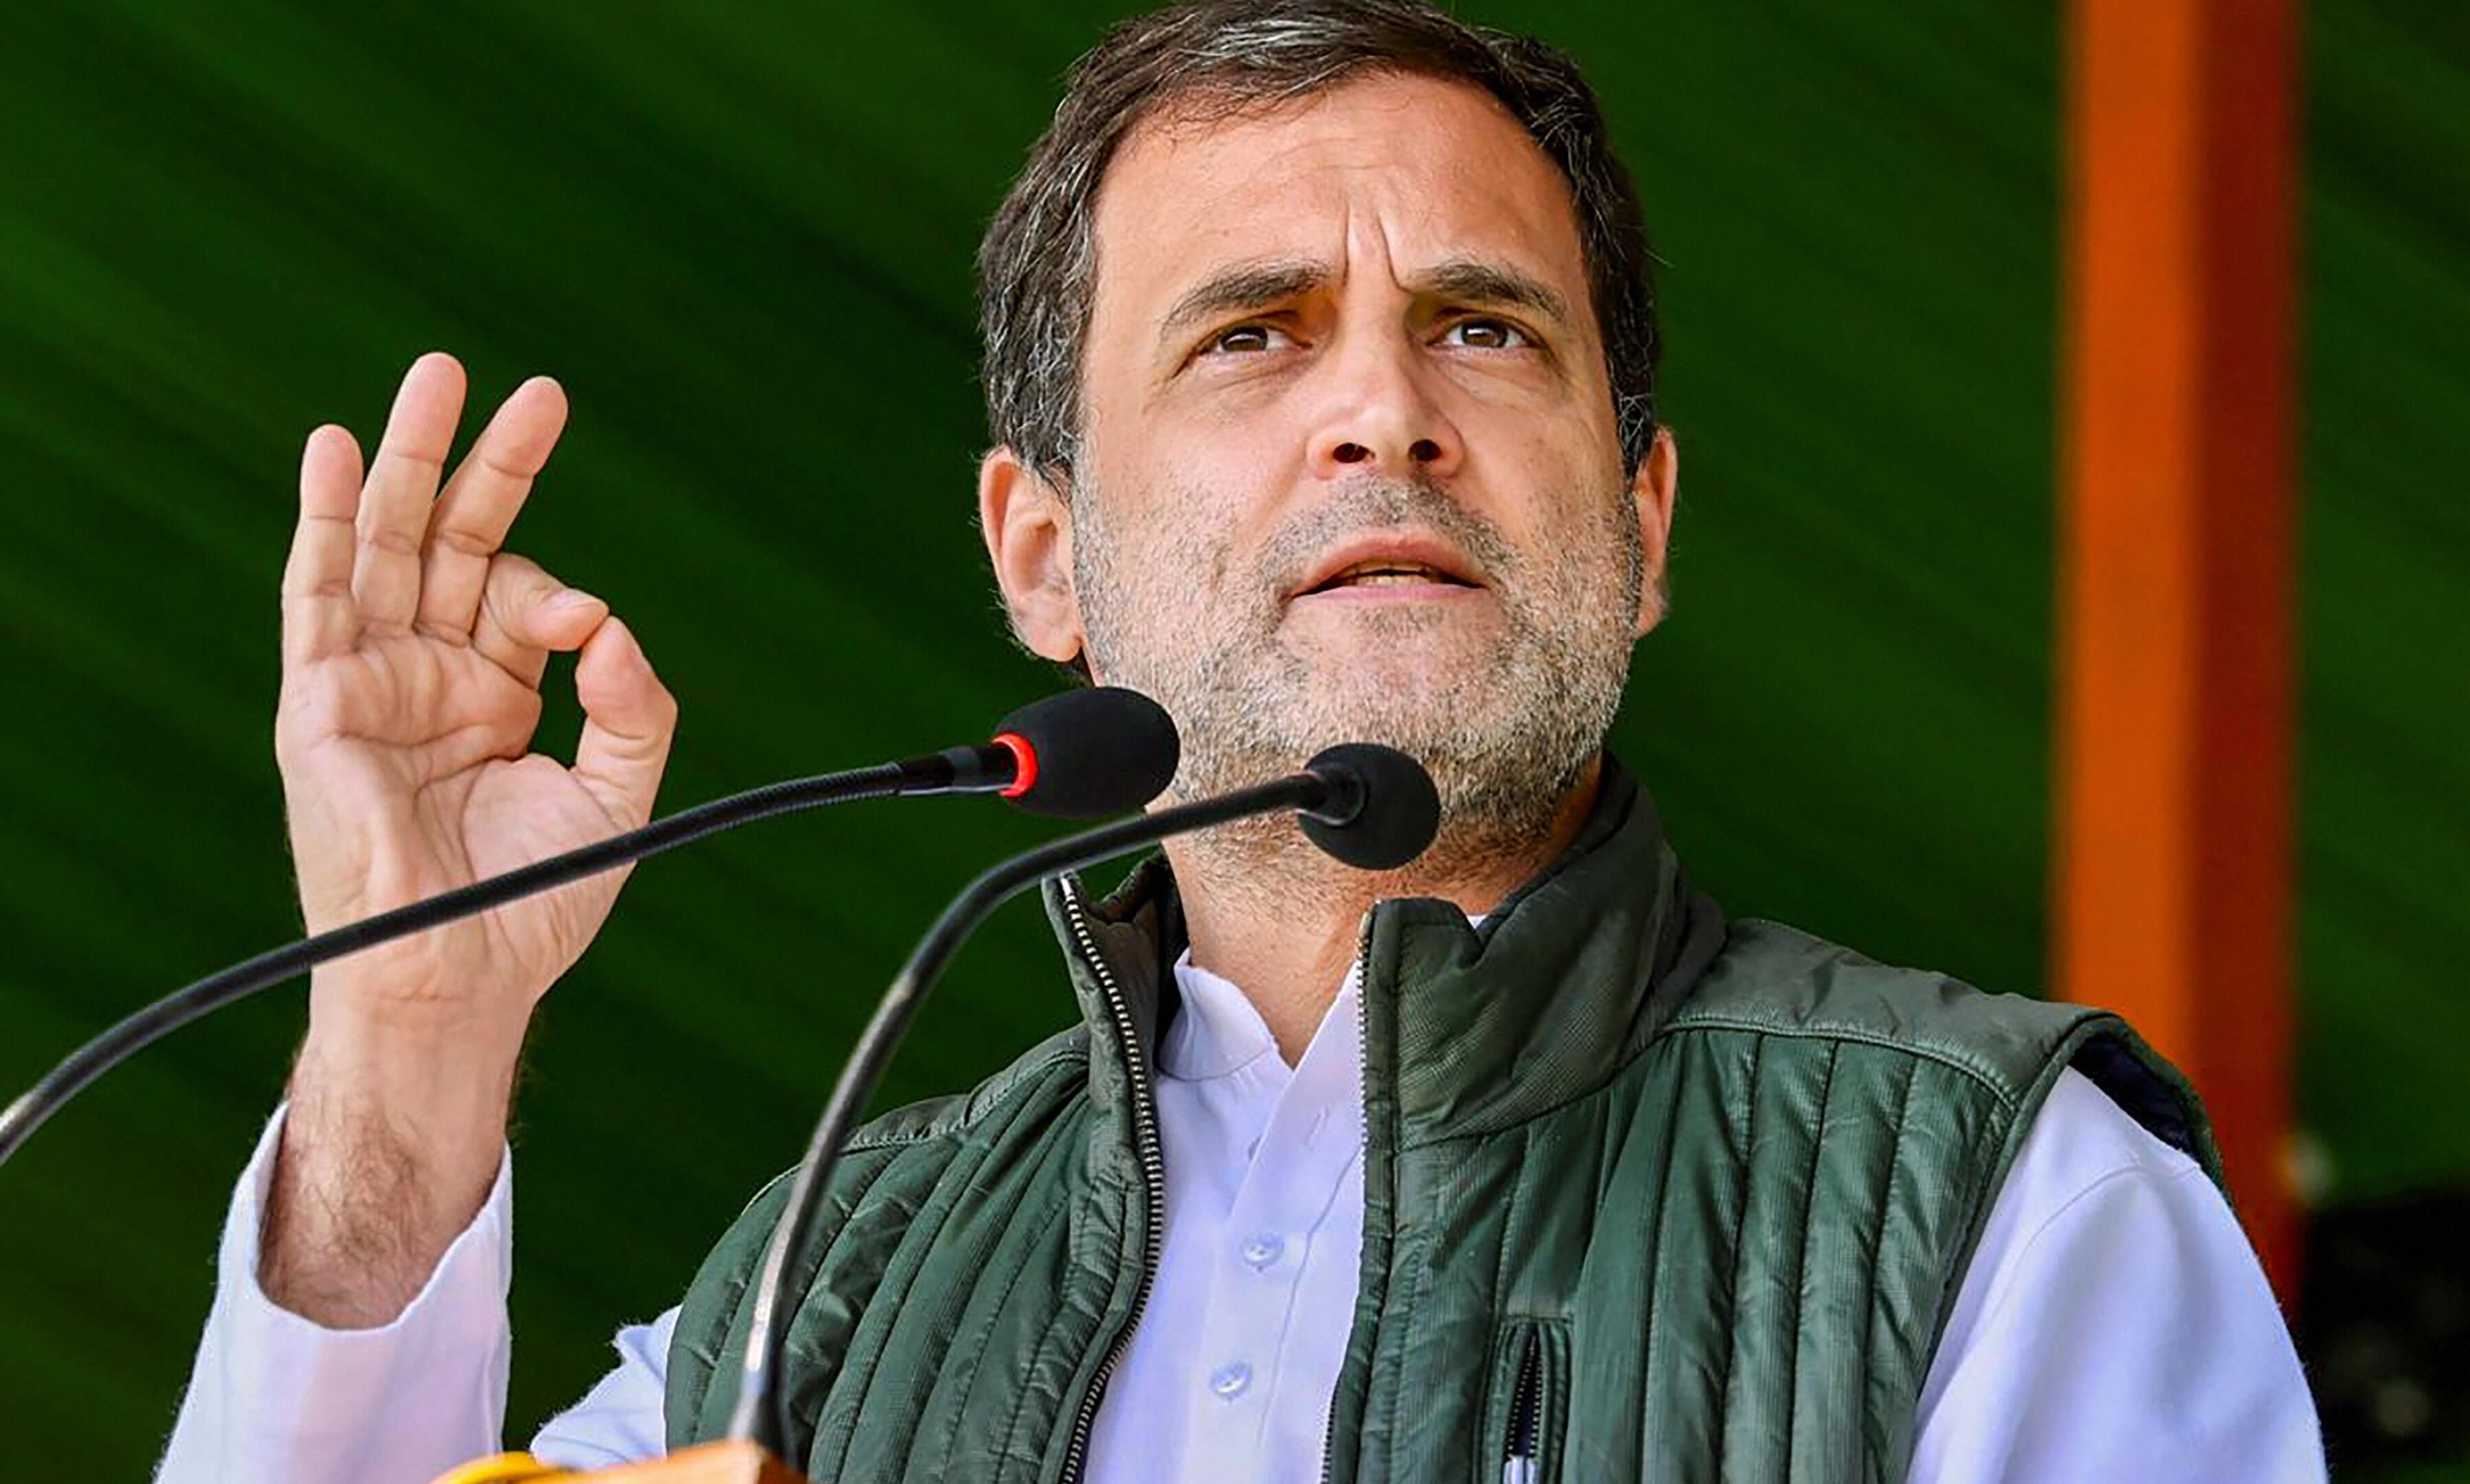 Congress will protect Manipurs history, culture, language: Rahul Gandhi